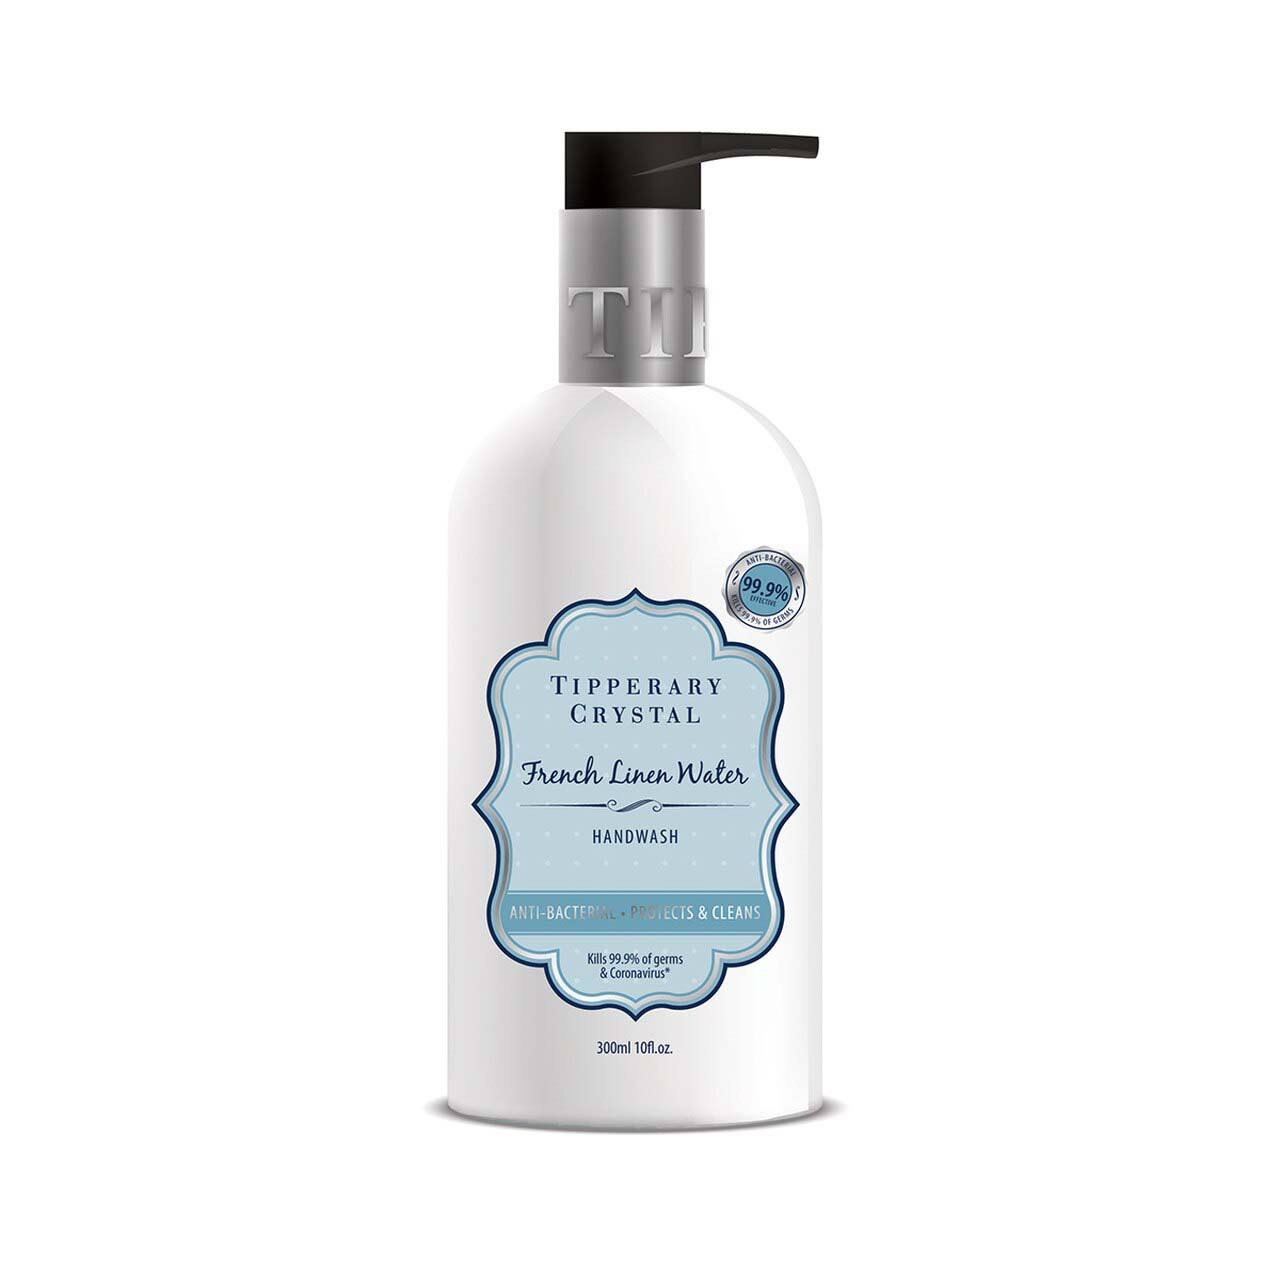 Tipperary Crystal French Linen Water Scented Antibacterial Handwash, 300ml